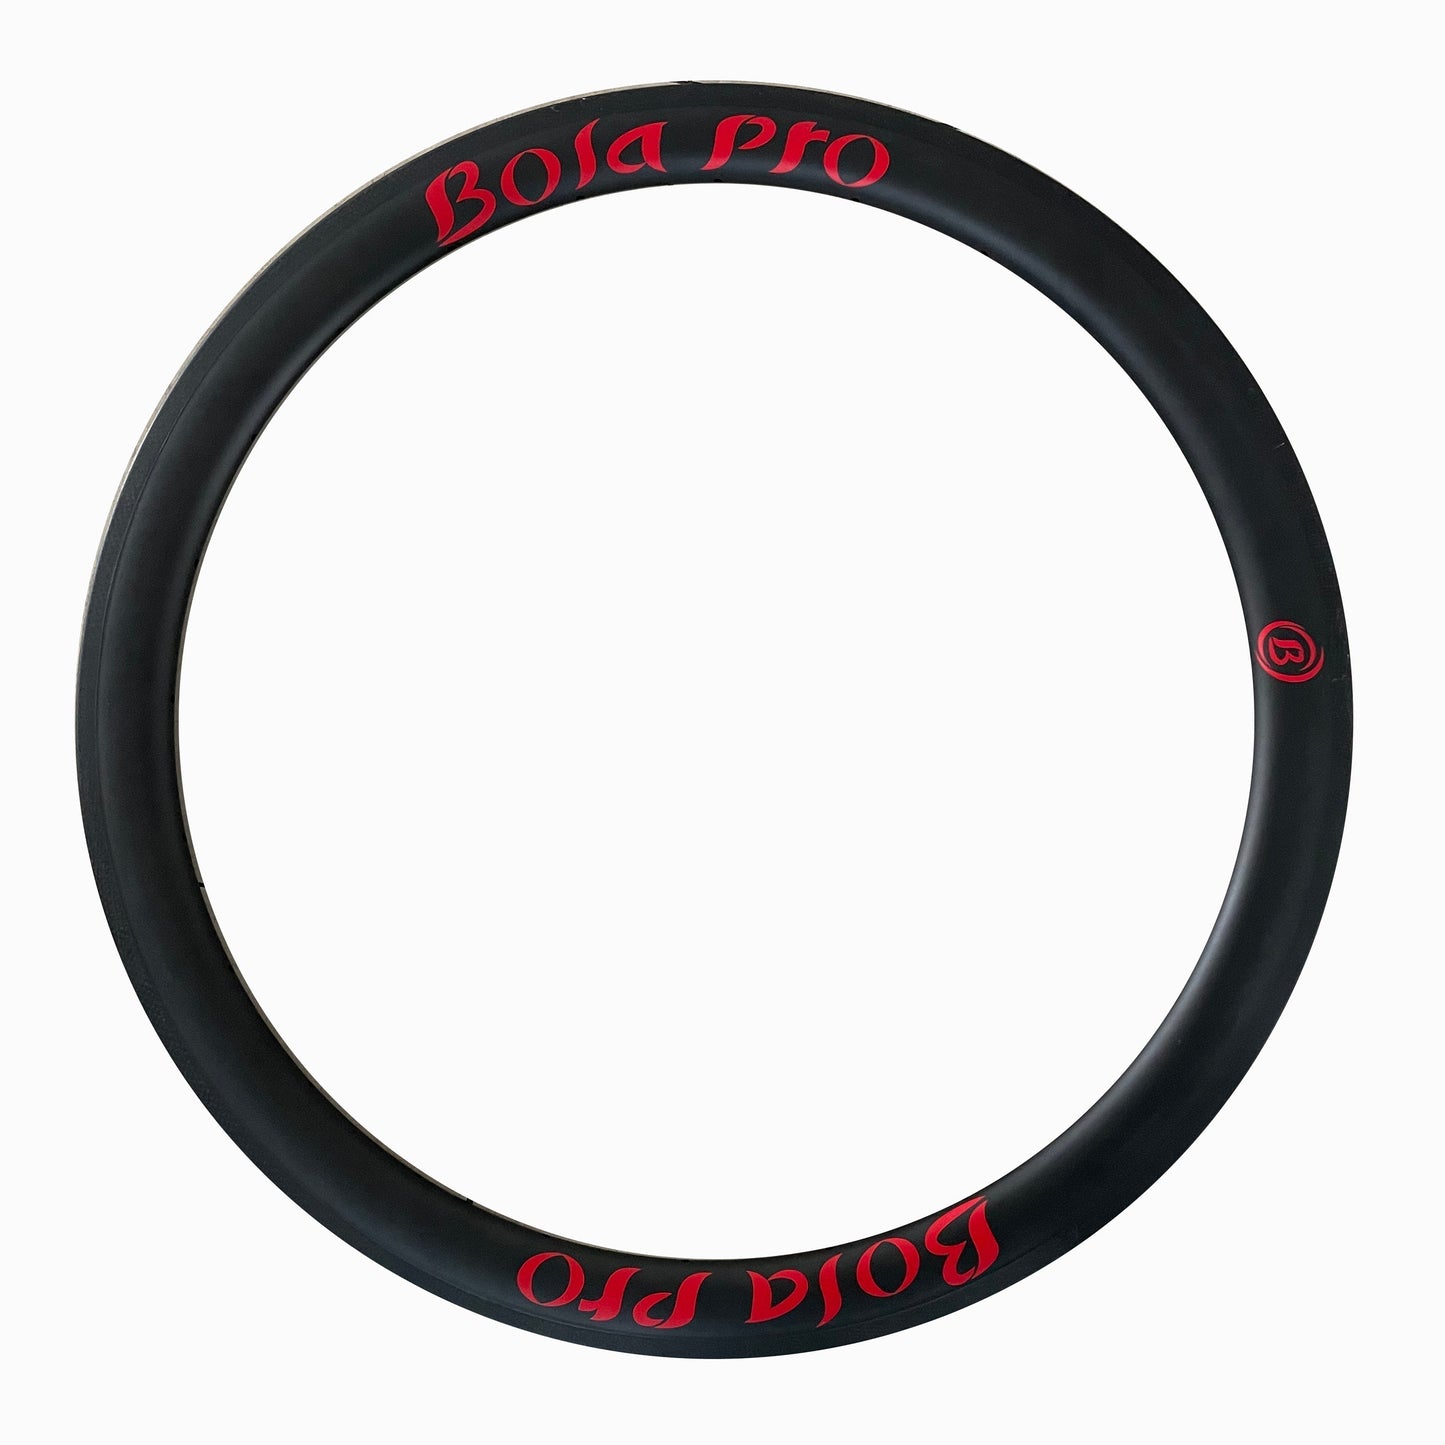 Asymmetric tubeless  carbon rims 55mm profile 28mm outer wide  21mm inner wide